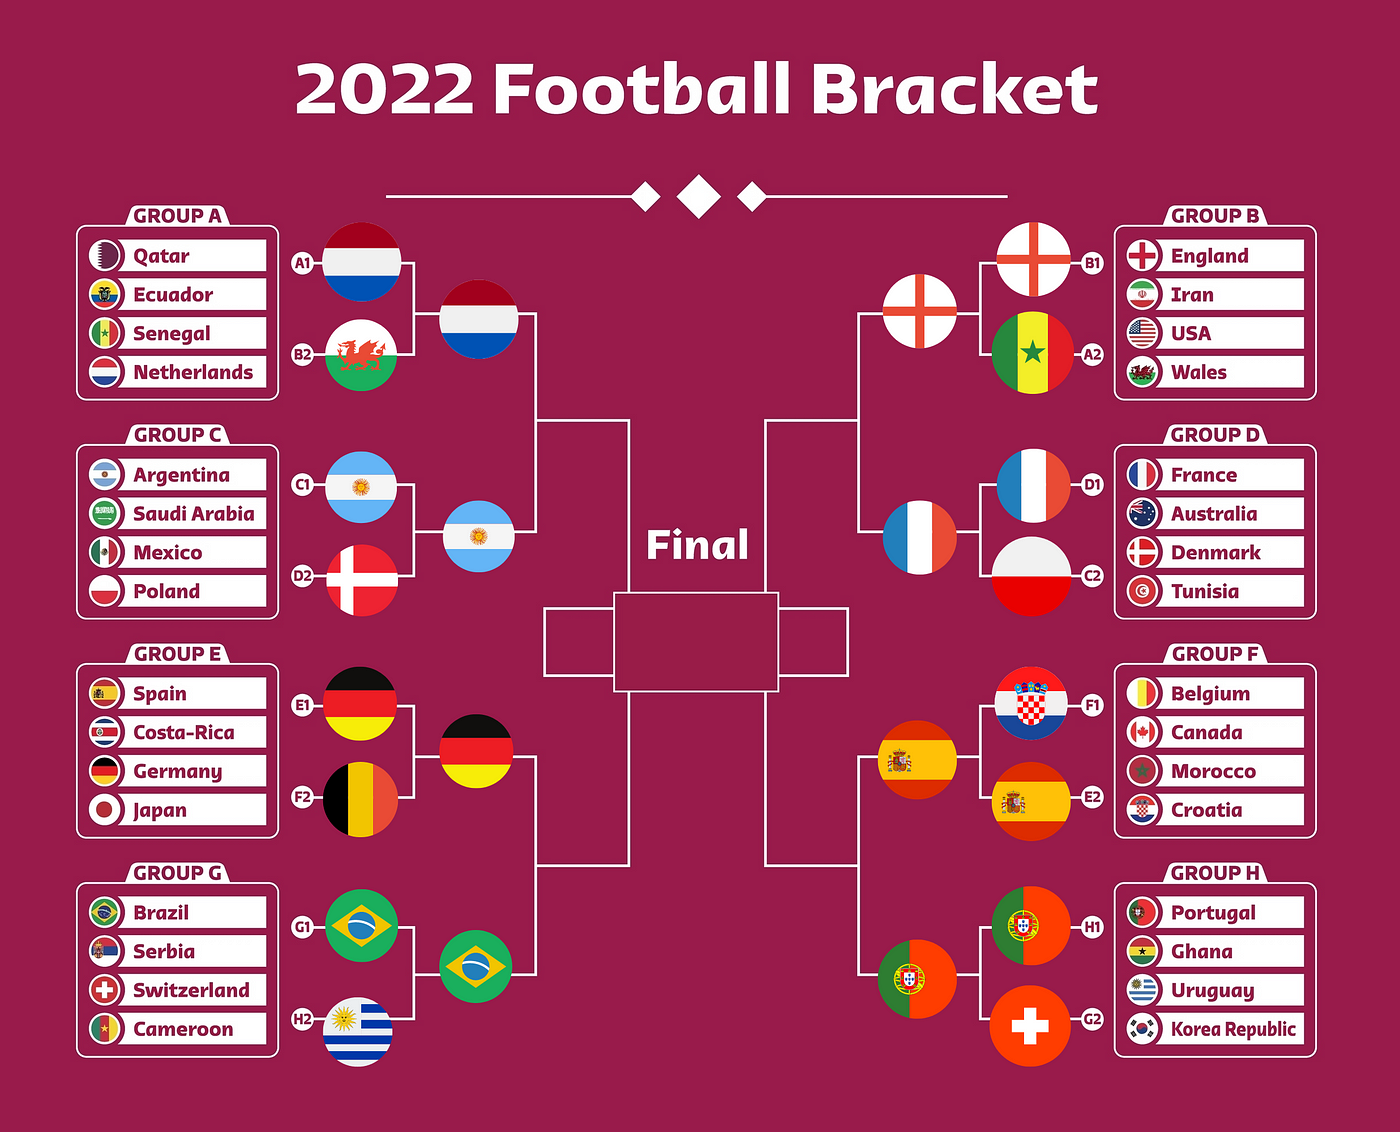 FIFA World Cup 2026 - News, Stats, Scores and Analysis